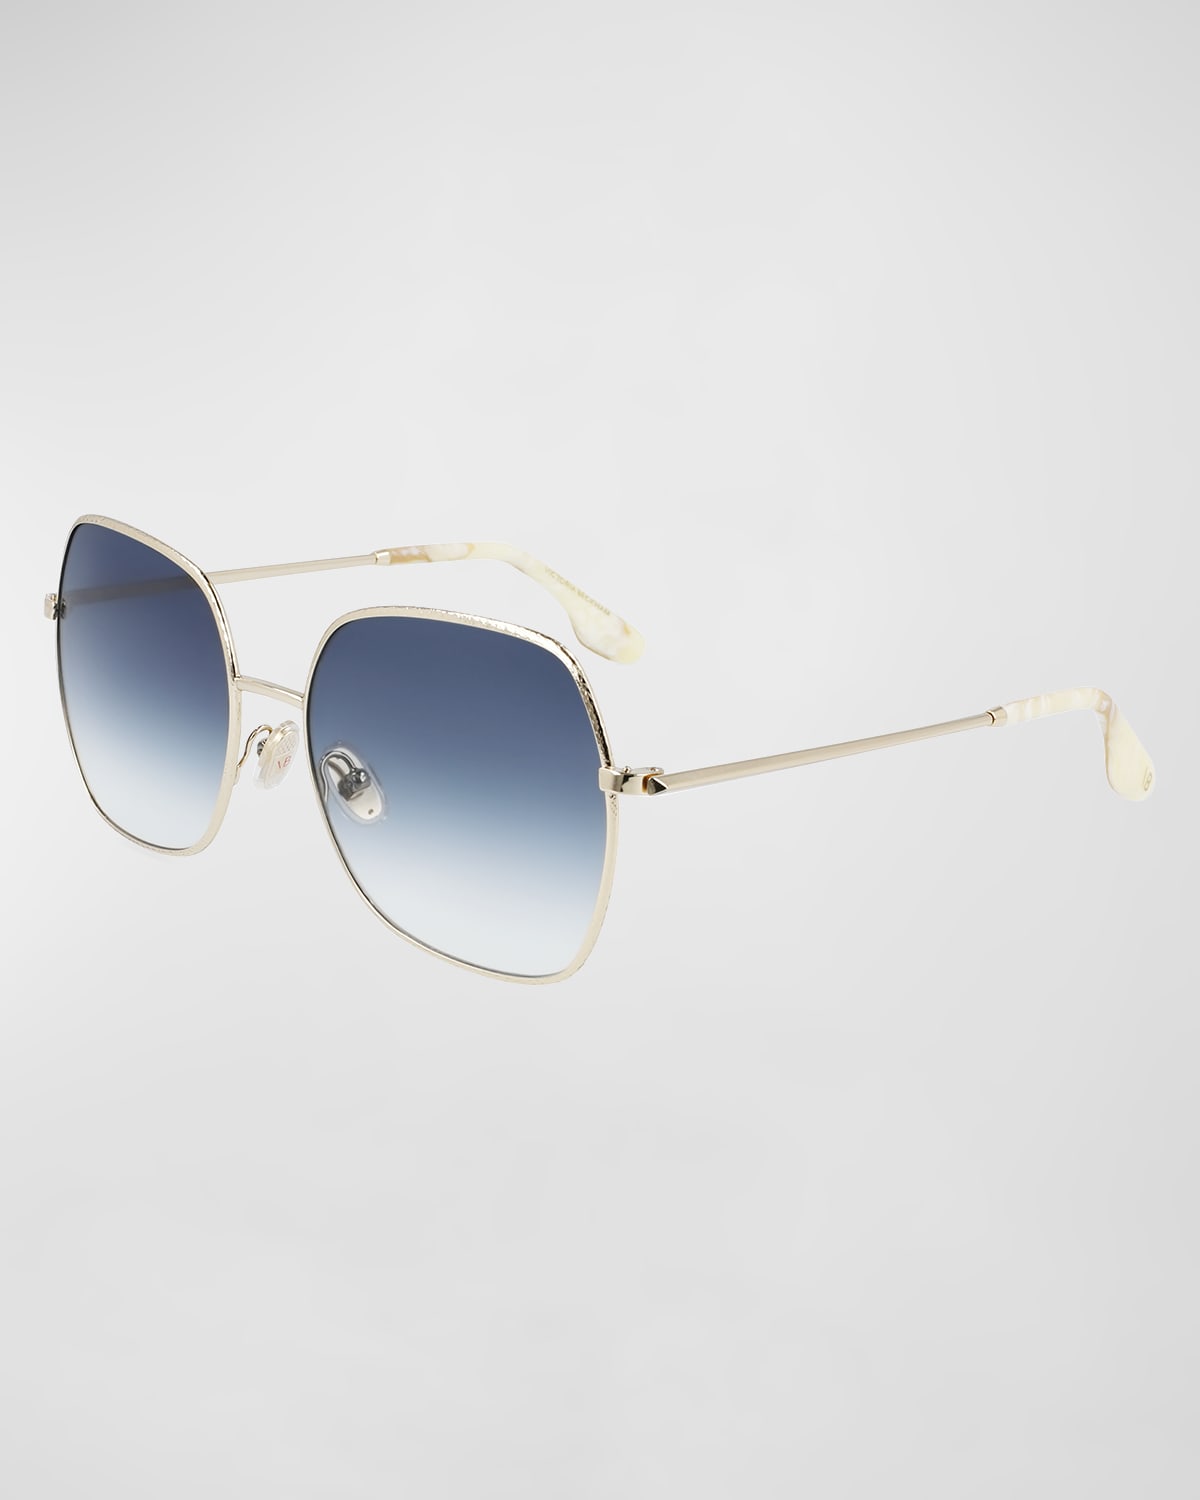 Victoria Beckham Oversized Square Hammered Metal Sunglasses In Blue,gold Tone